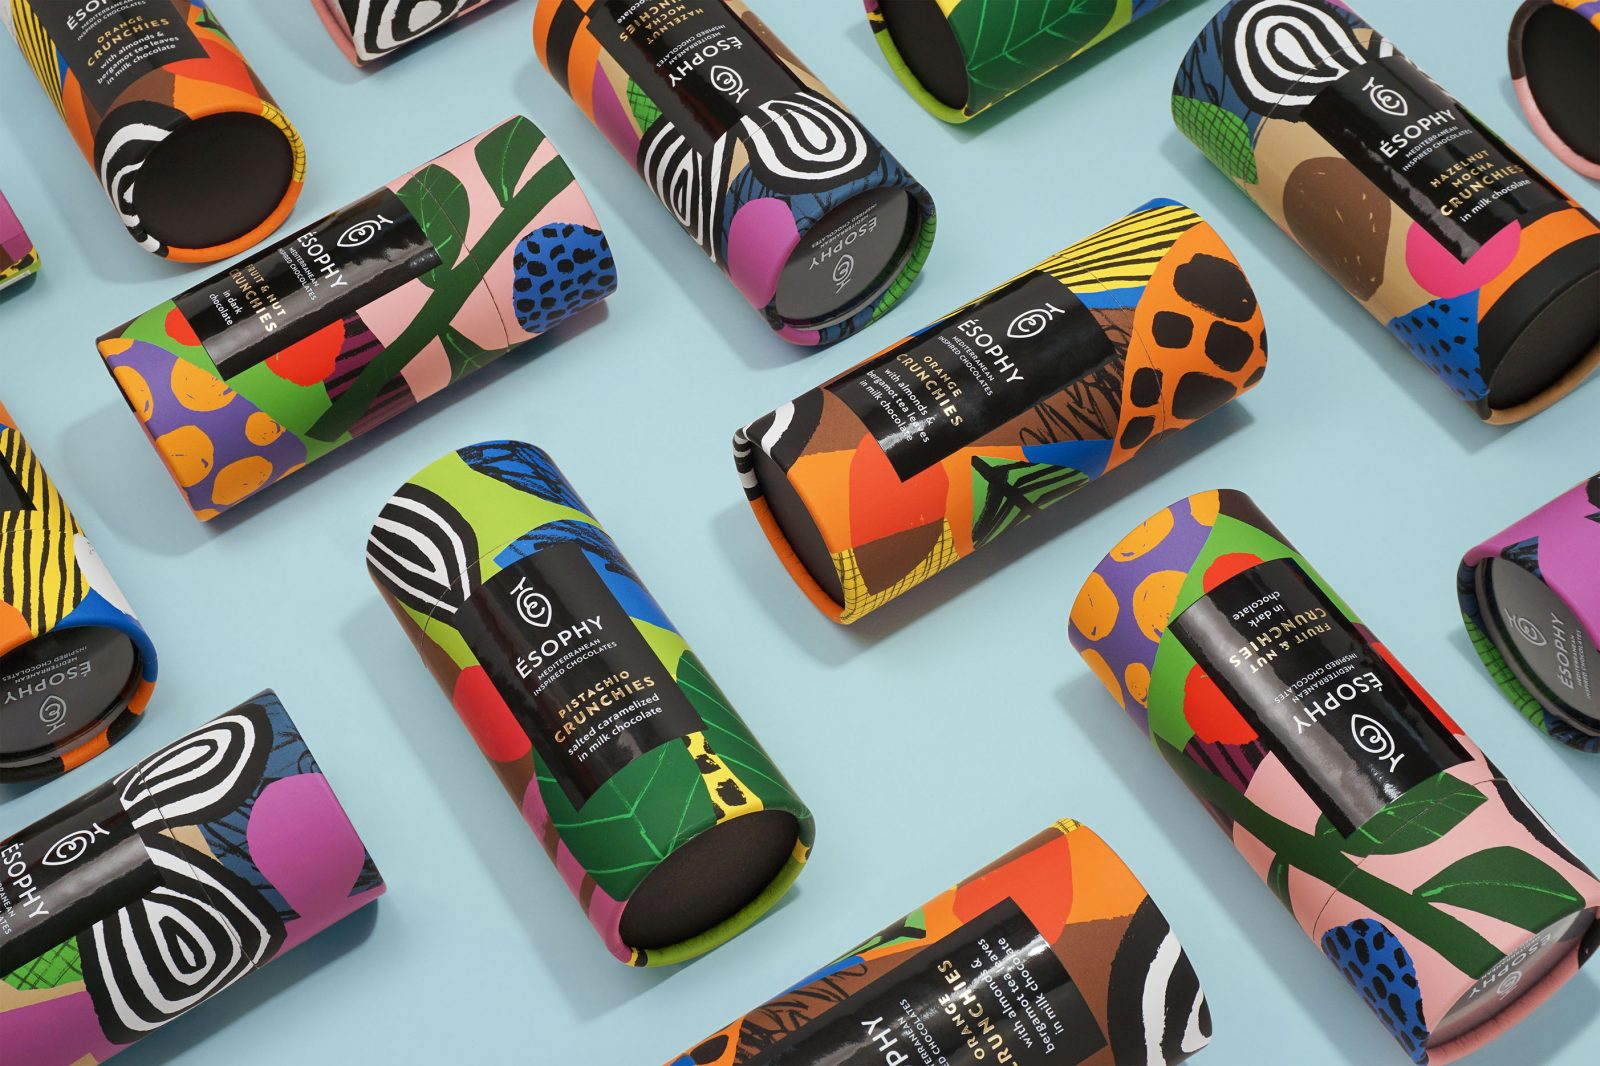 George Probonas Creates Colourful Packaging Design for Ésophy Crunchies